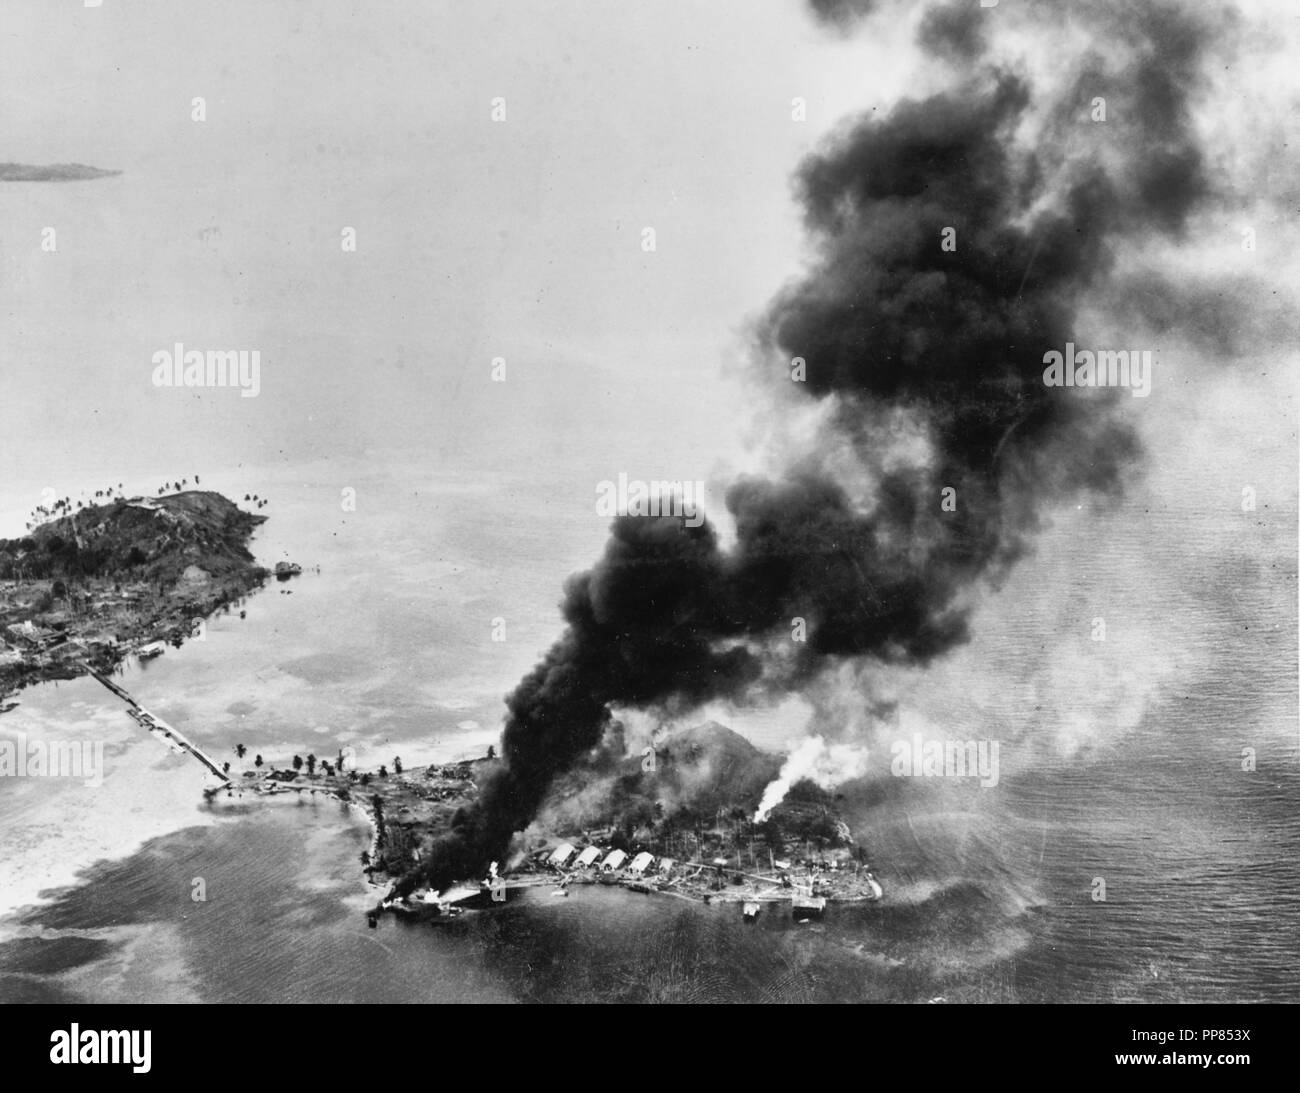 Guadalcanal-Tulagi Landings, 7-9 August 1942 - Fires burning among Japanese facilities and seaplanes on Tanambogo Island, east of Tulagi, on the invasion's first day, 7 August 1942. This view looks about SSW, with Gavutu Island to the left, connected to Tanambogo by a causeway. Stock Photo